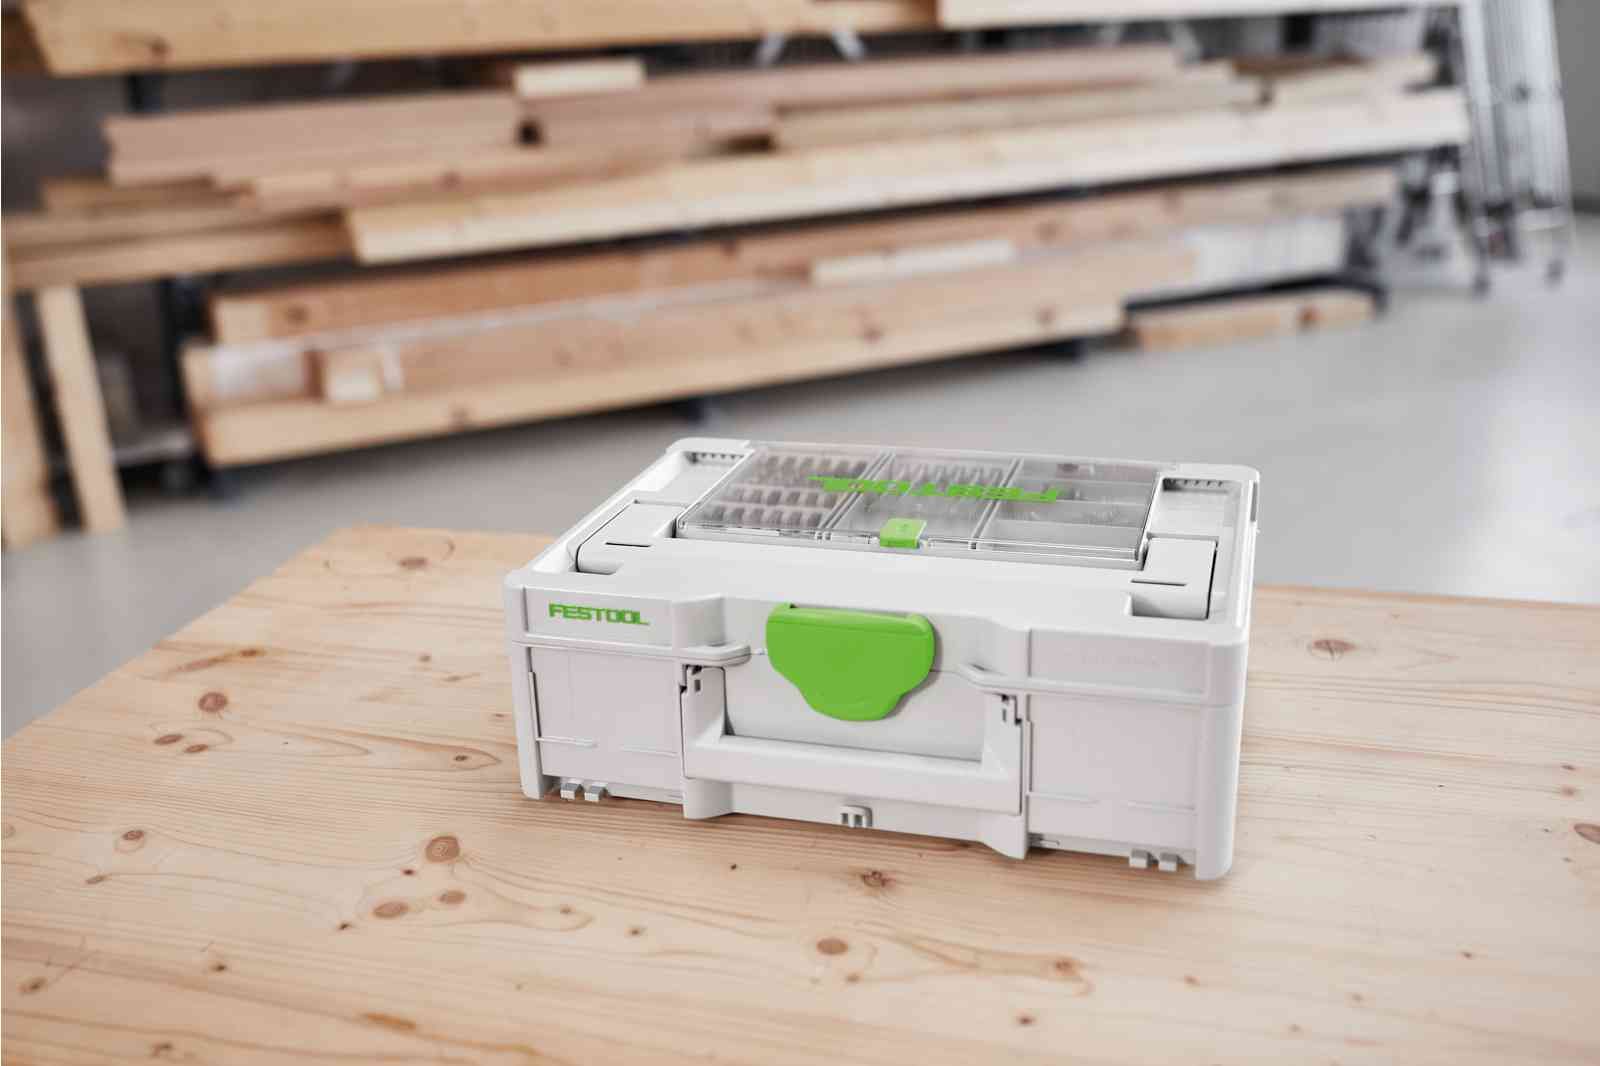 Systainer3 SYS 3 Medium 237mm x 396mm with Storage Lid 577348 by Festool